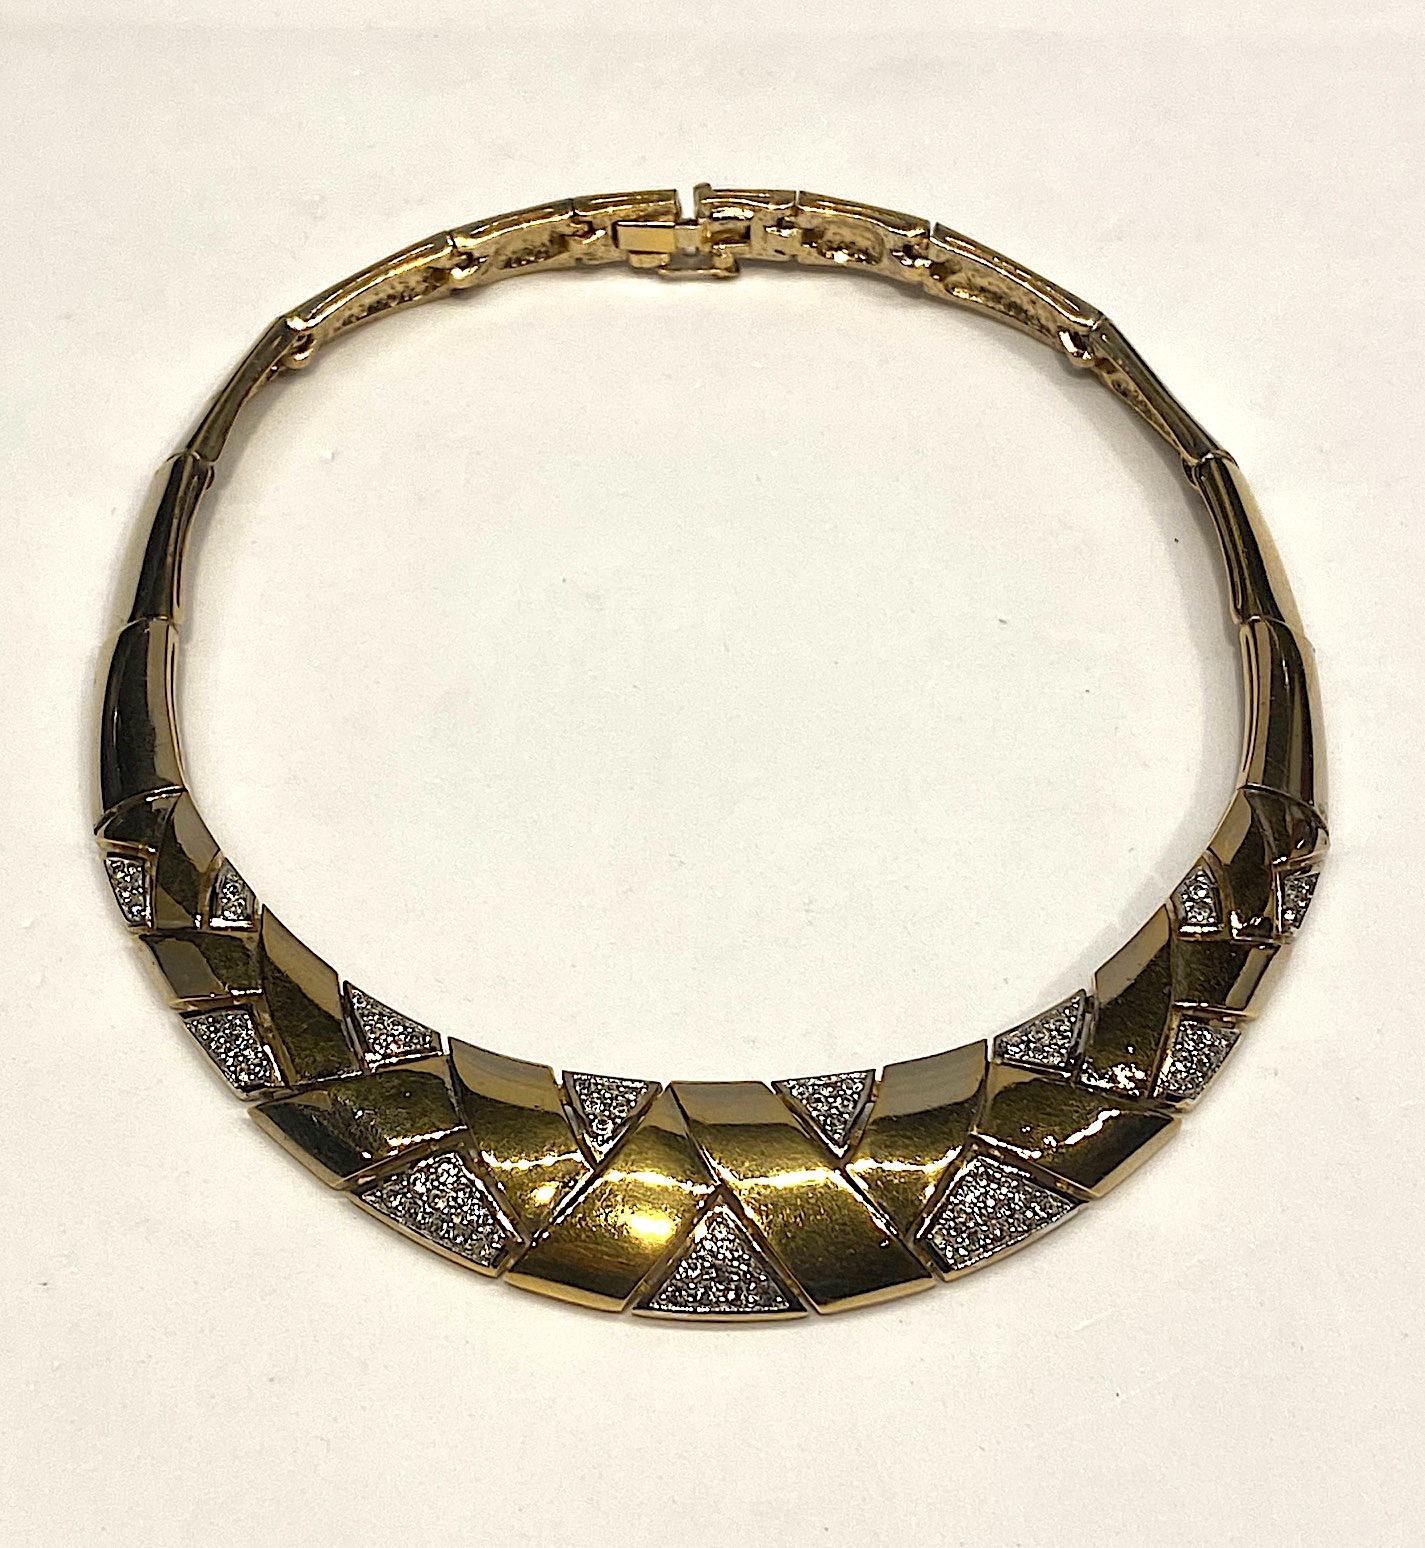 Panetta Art Deco style necklace from the 1980s in a rich gold plate with rhinestone accent. The collar is graduated with the a front piece 3.75 inches wide and .88 of an inch high. The following links gradually taper to .38 of an inch at the back